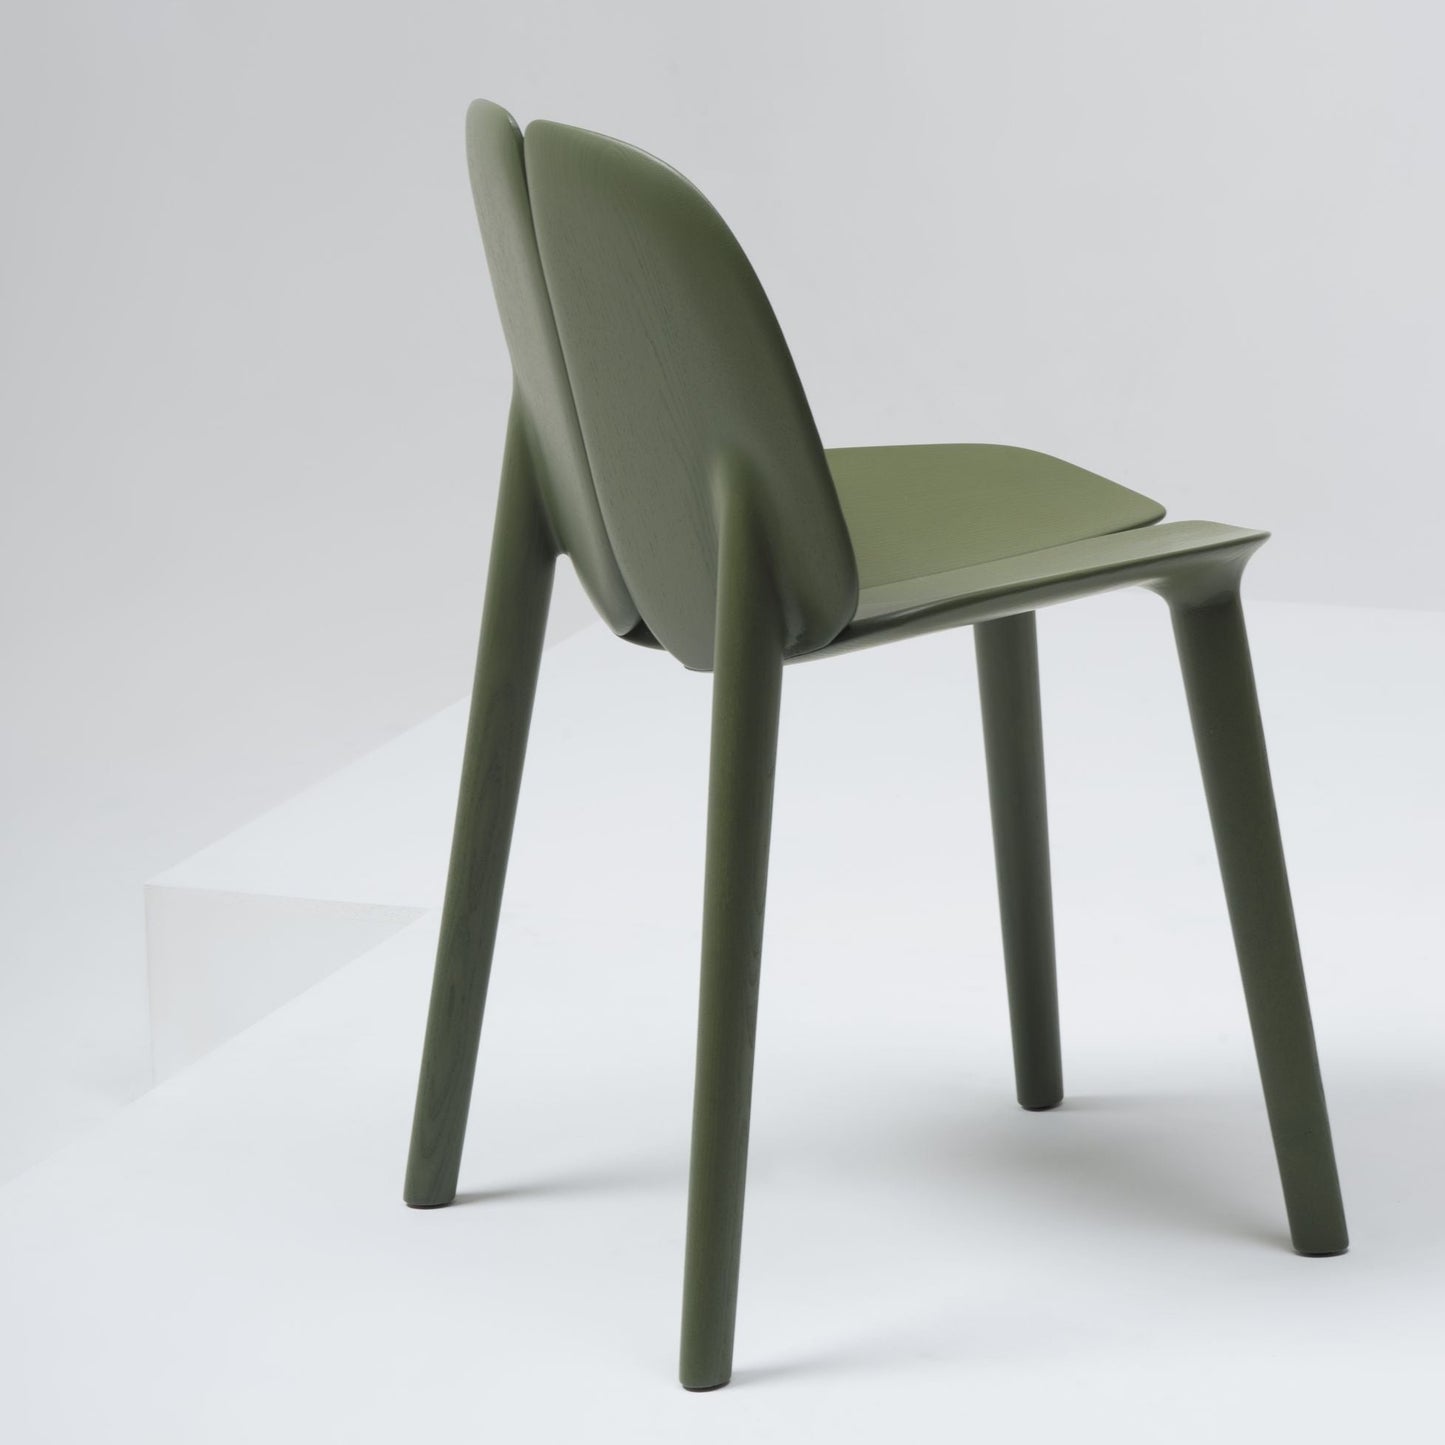 Osso chair